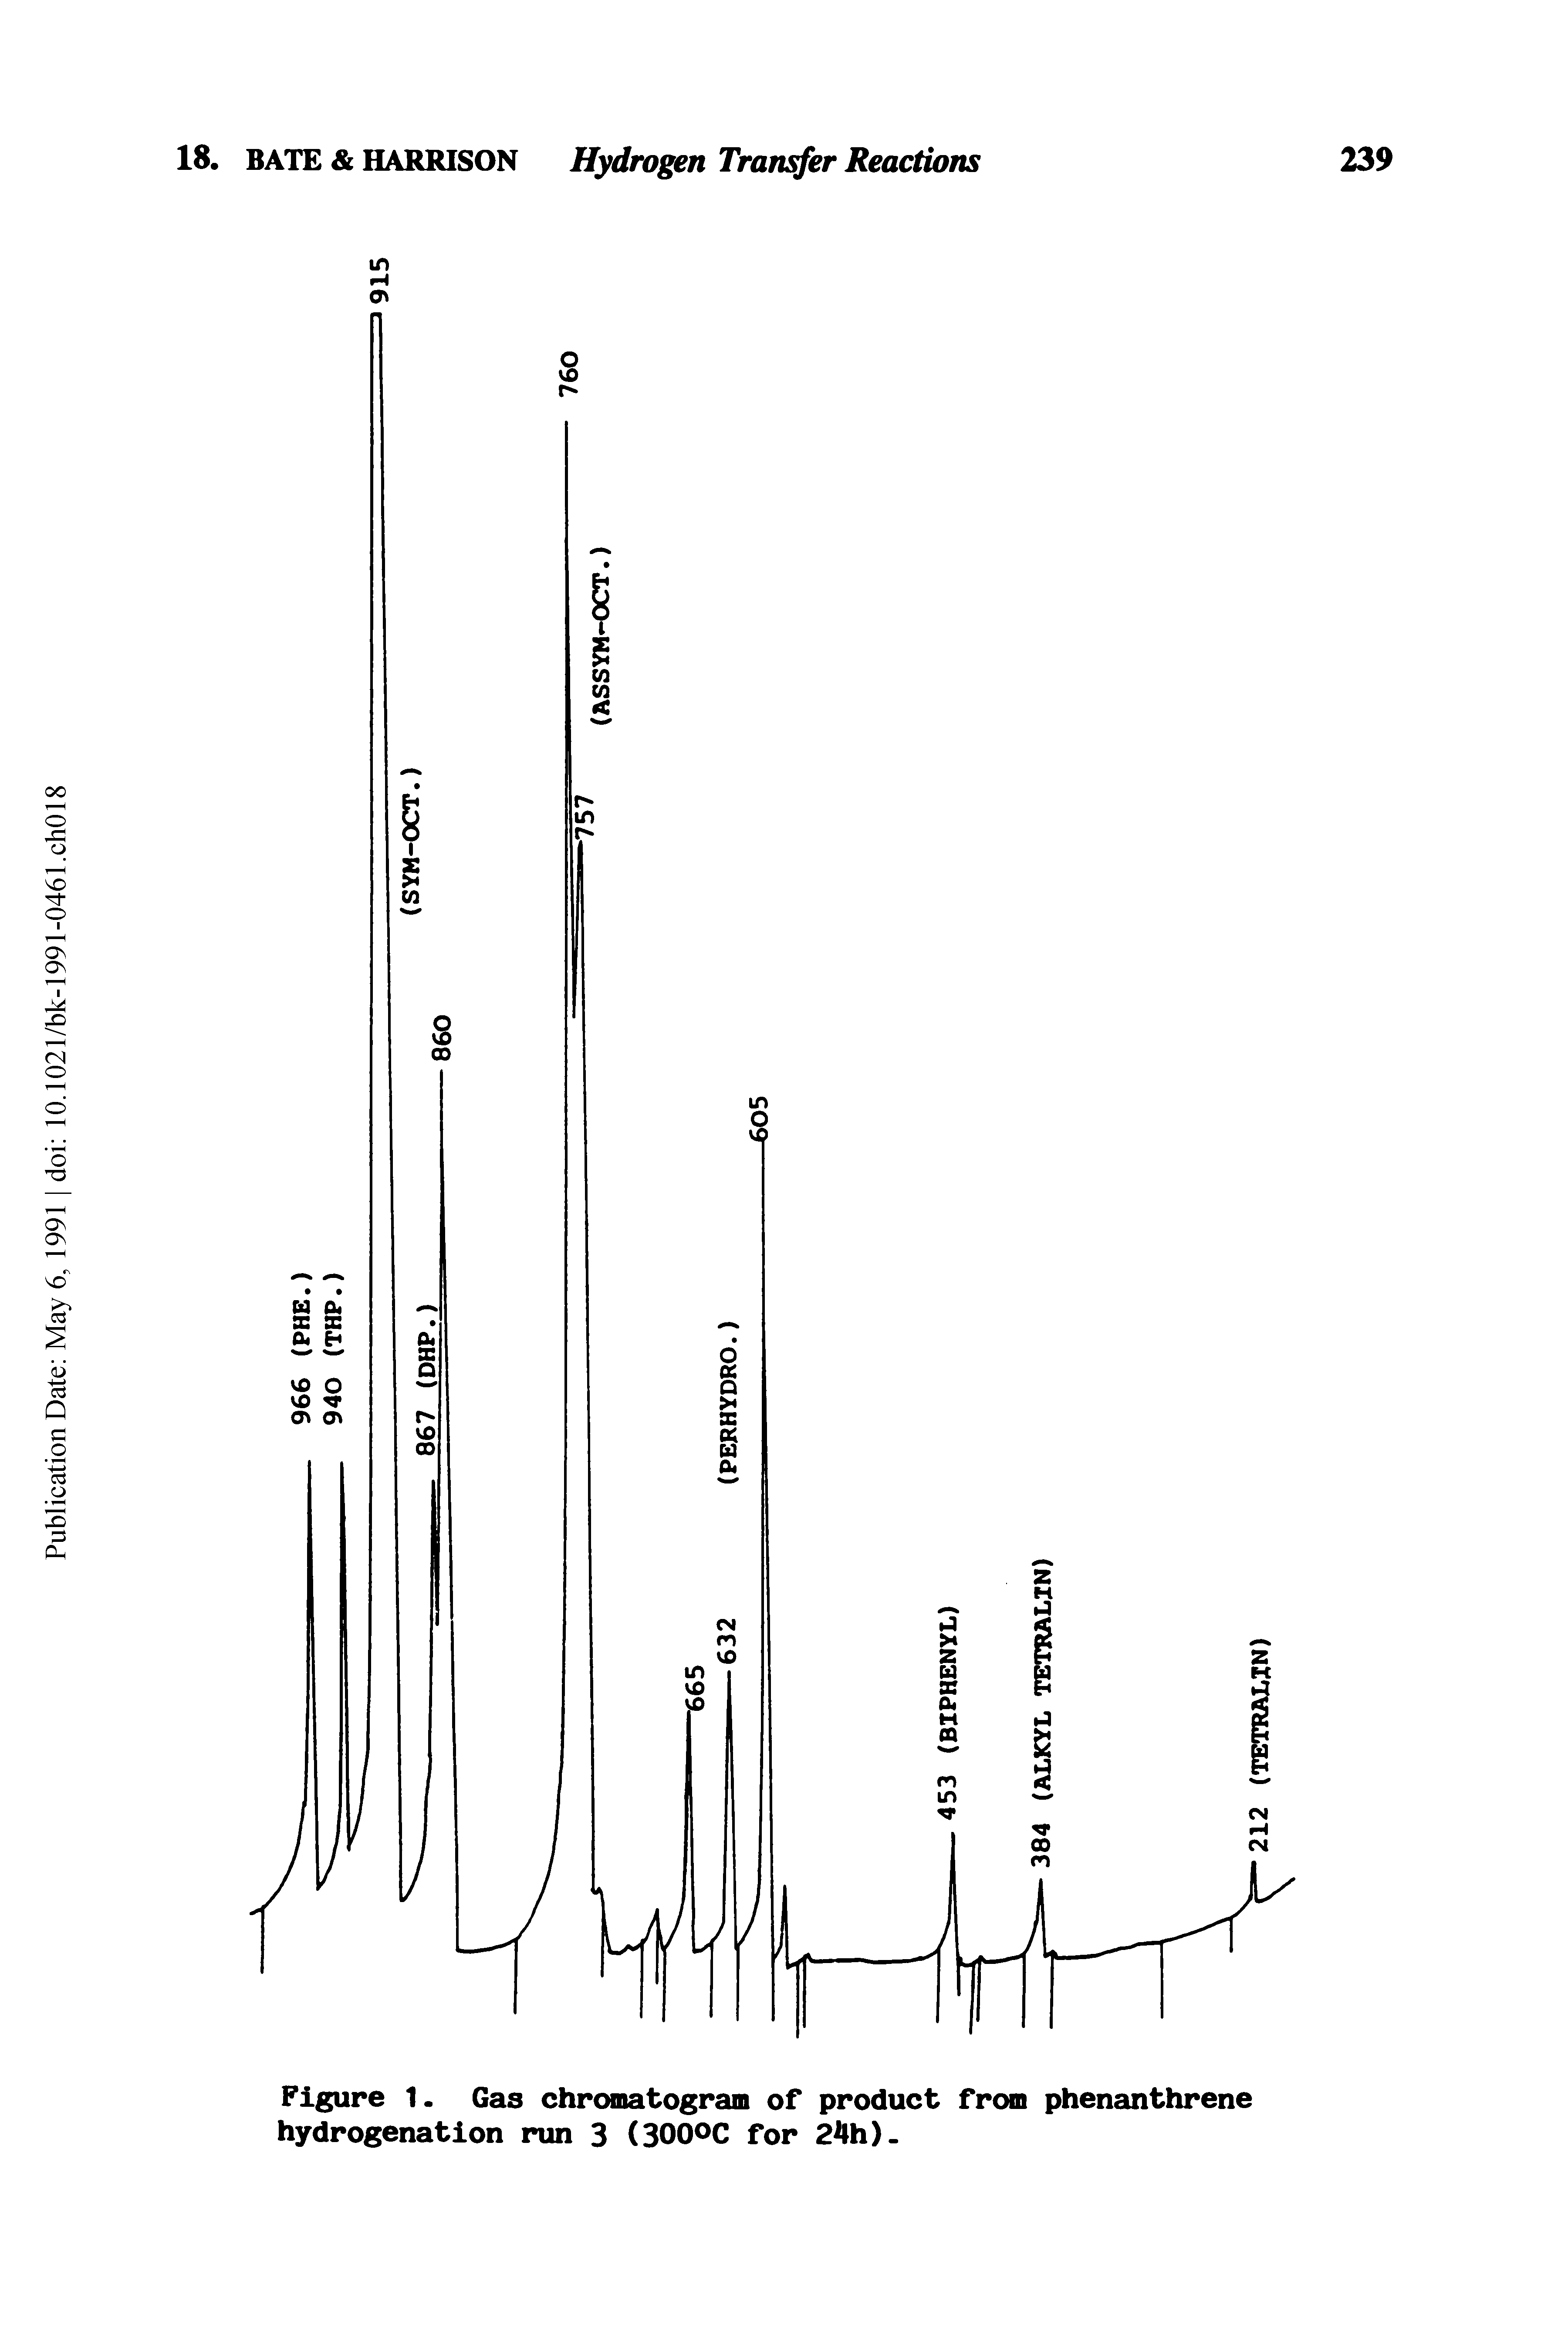 Figure 1. Gas chromatogram of product from phenanthrene hydrogenation run 3 (30QOC for 24h).